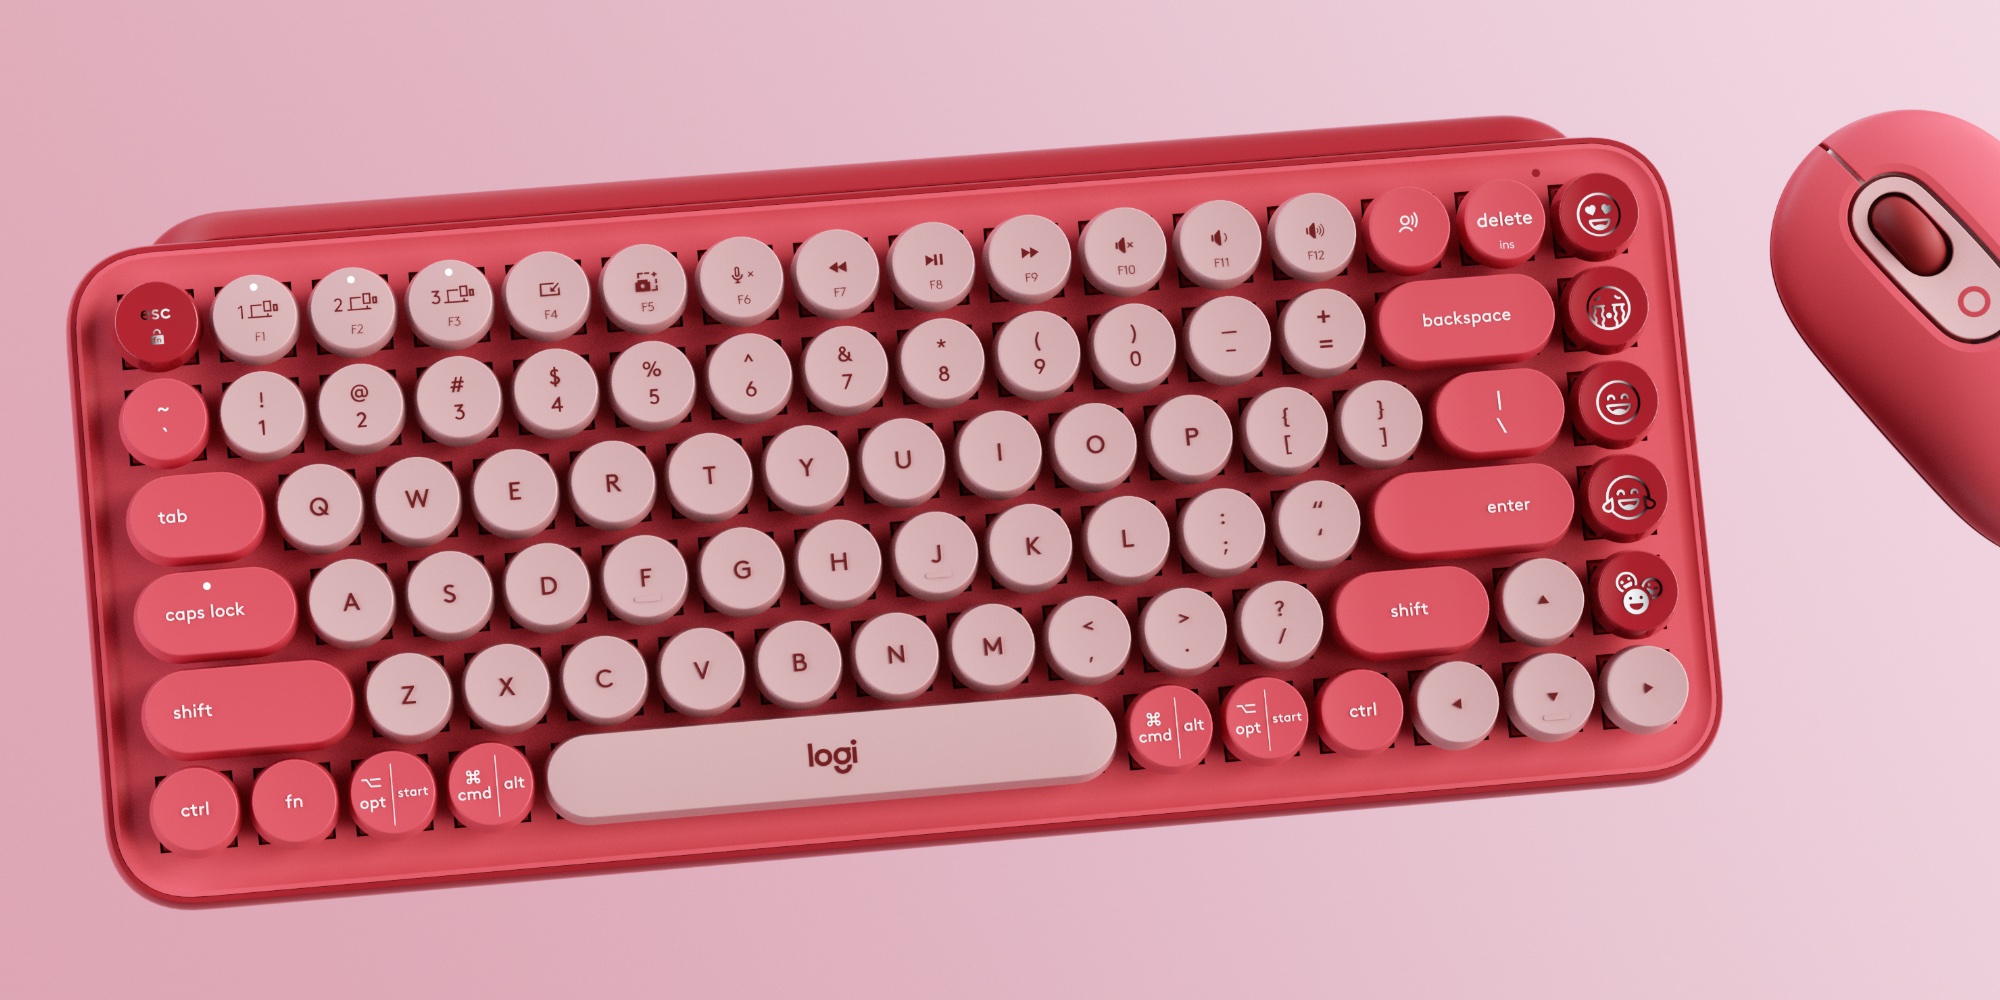 Logitech Pop Keys keyboard and mouse review: cute and quirky